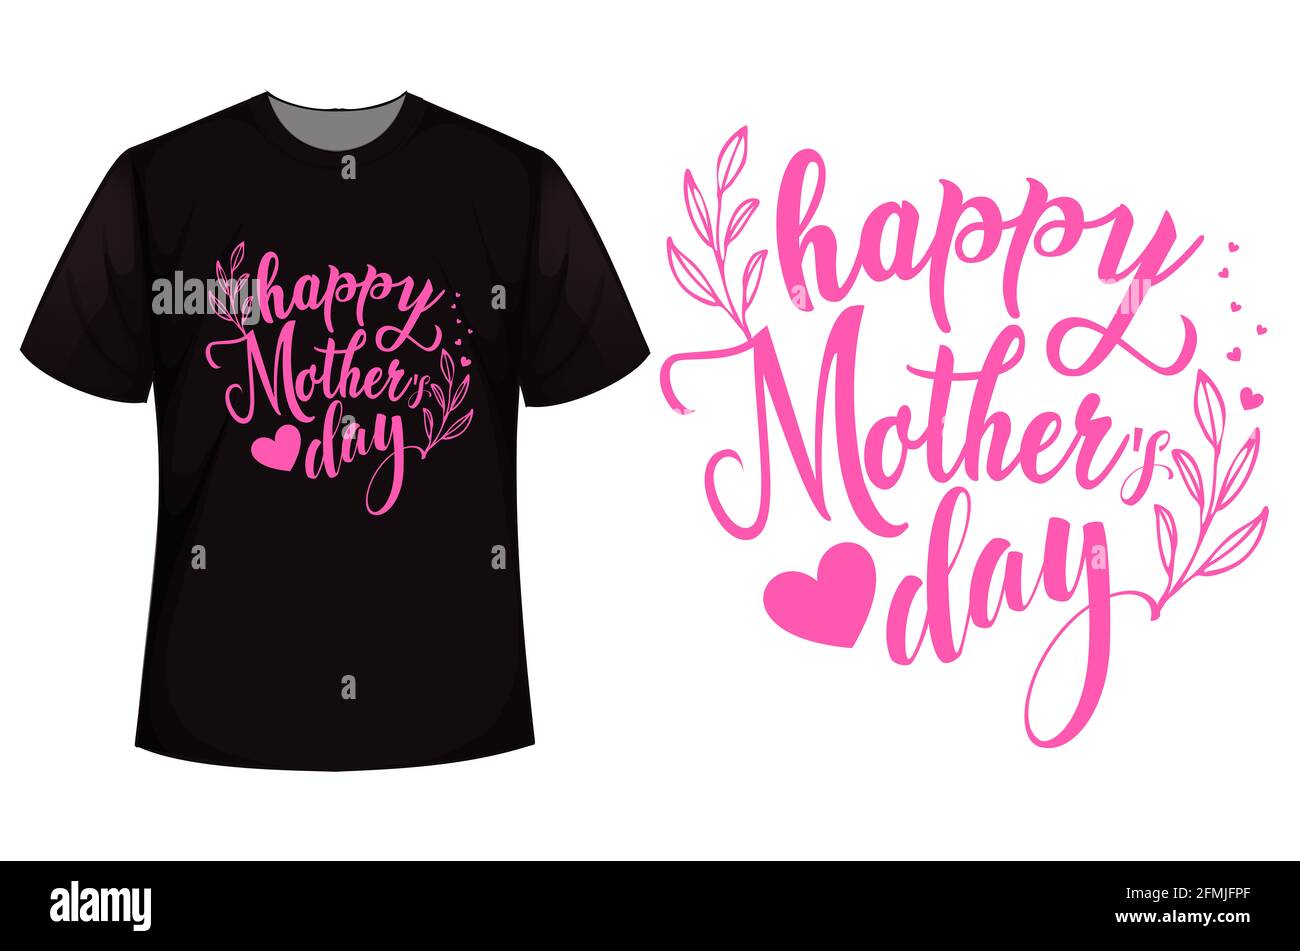 happy mother's day t-shirt design international mother's day vector design Stock Photo